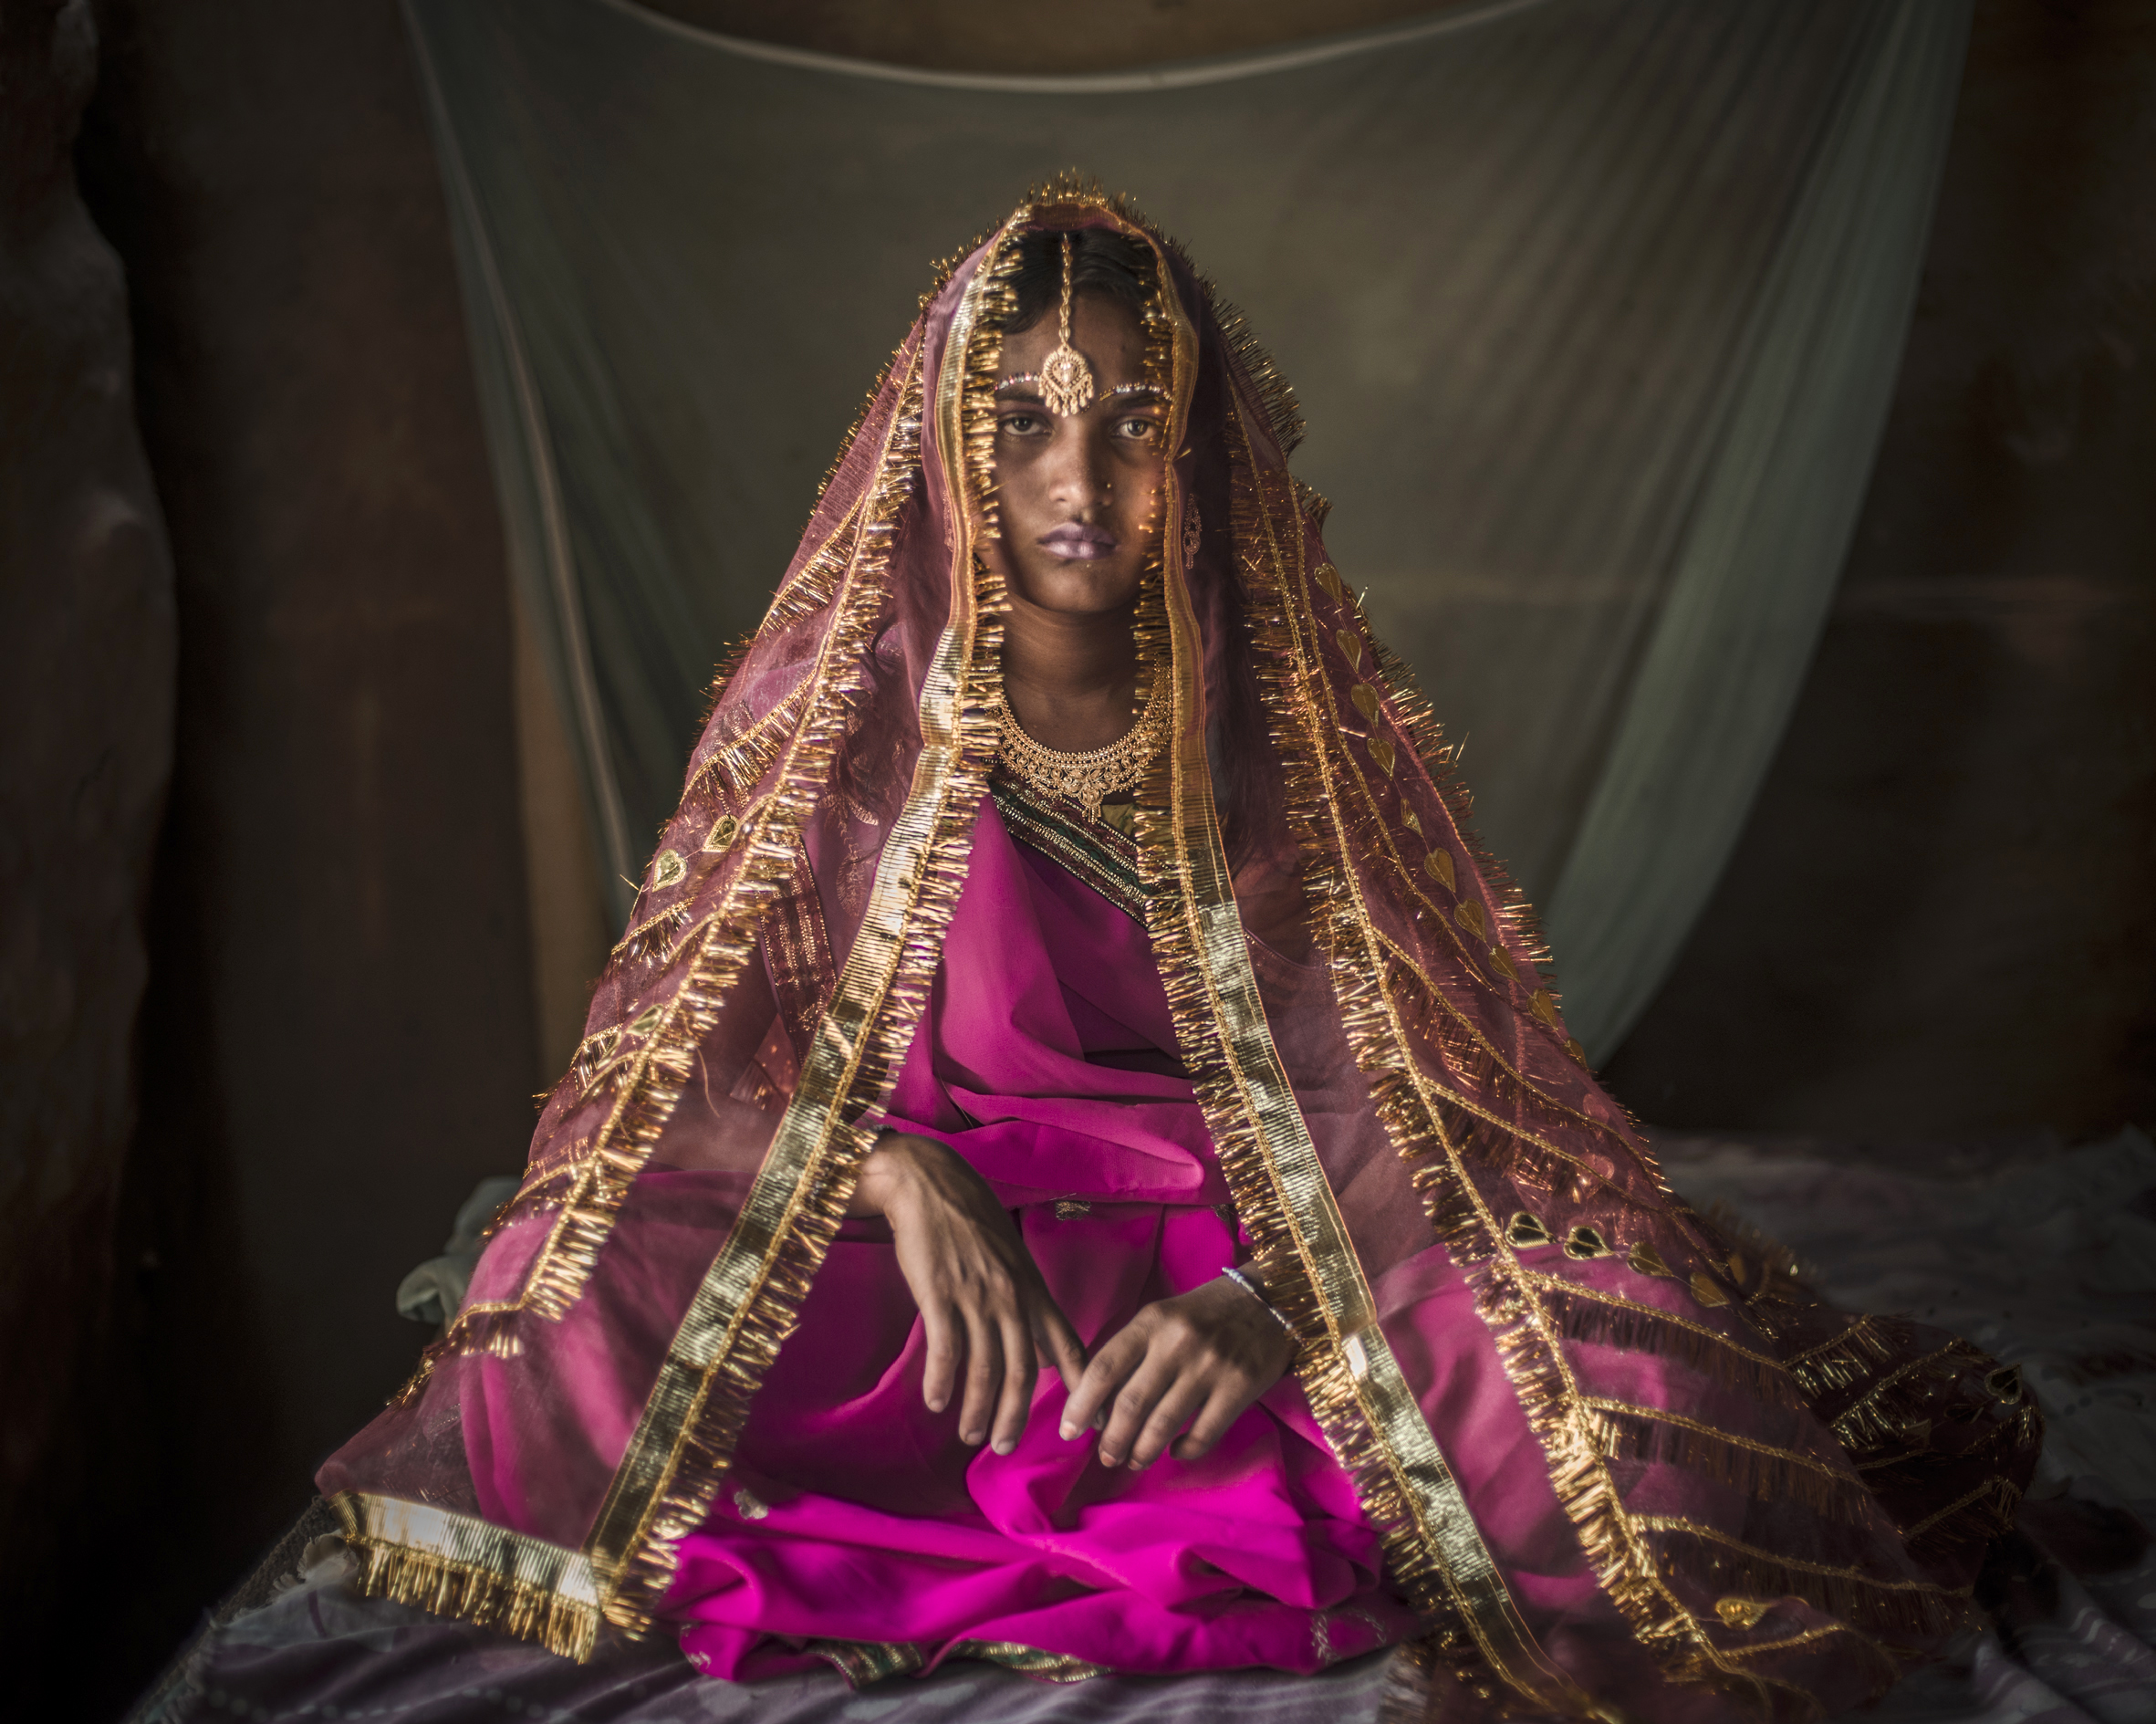 Anjali Kumari Khang is 12 years old. “ I am not happy. I do not want to get married. I hope my husband gets a job in a foreign city. Then I can come back to my mother’s home and stay for as long as I want.” Einerwa Village, Saptari district, Nepal. Photo by Poulomi Basu/VII Mentor.